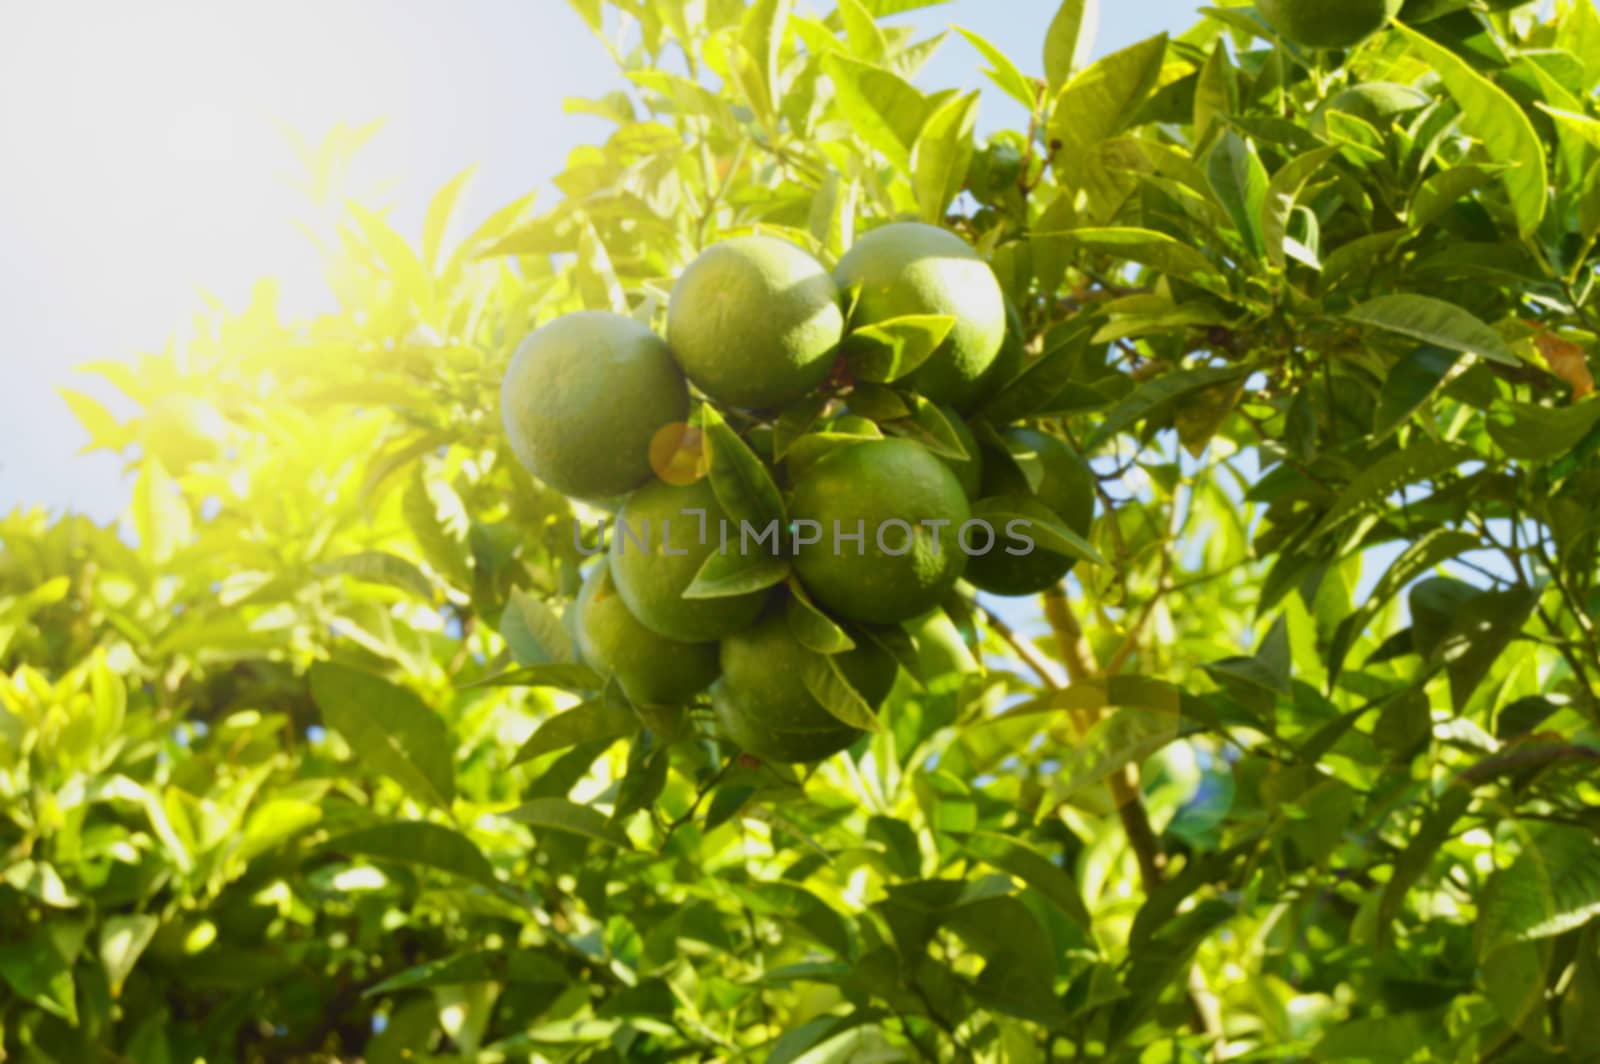 Green mandarins ripen on the tree in the sunlight, the concept of growing organic fruit, vegetable background with copy space.